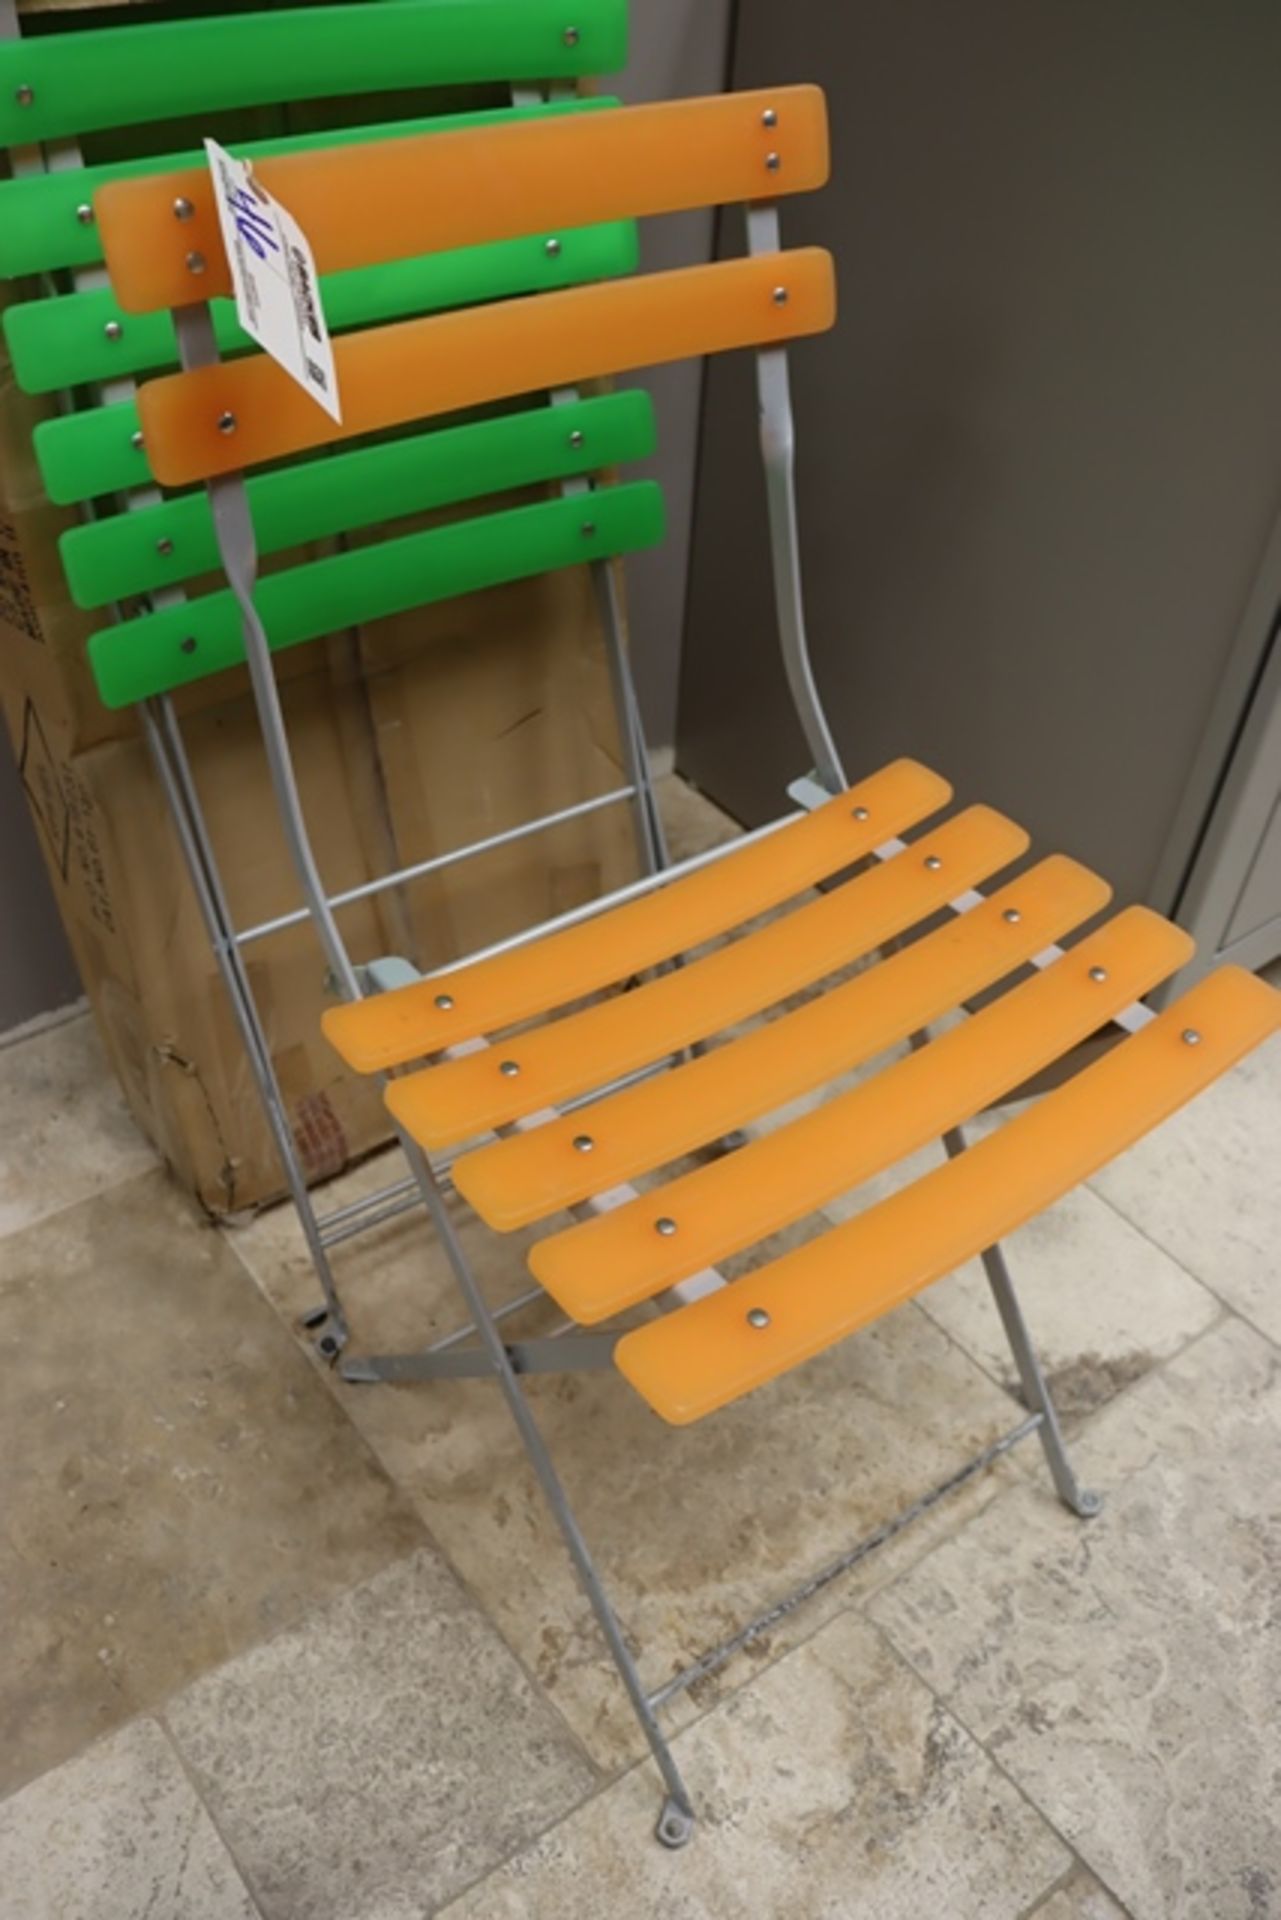 2 sets of metal framed orange & green poly chairs